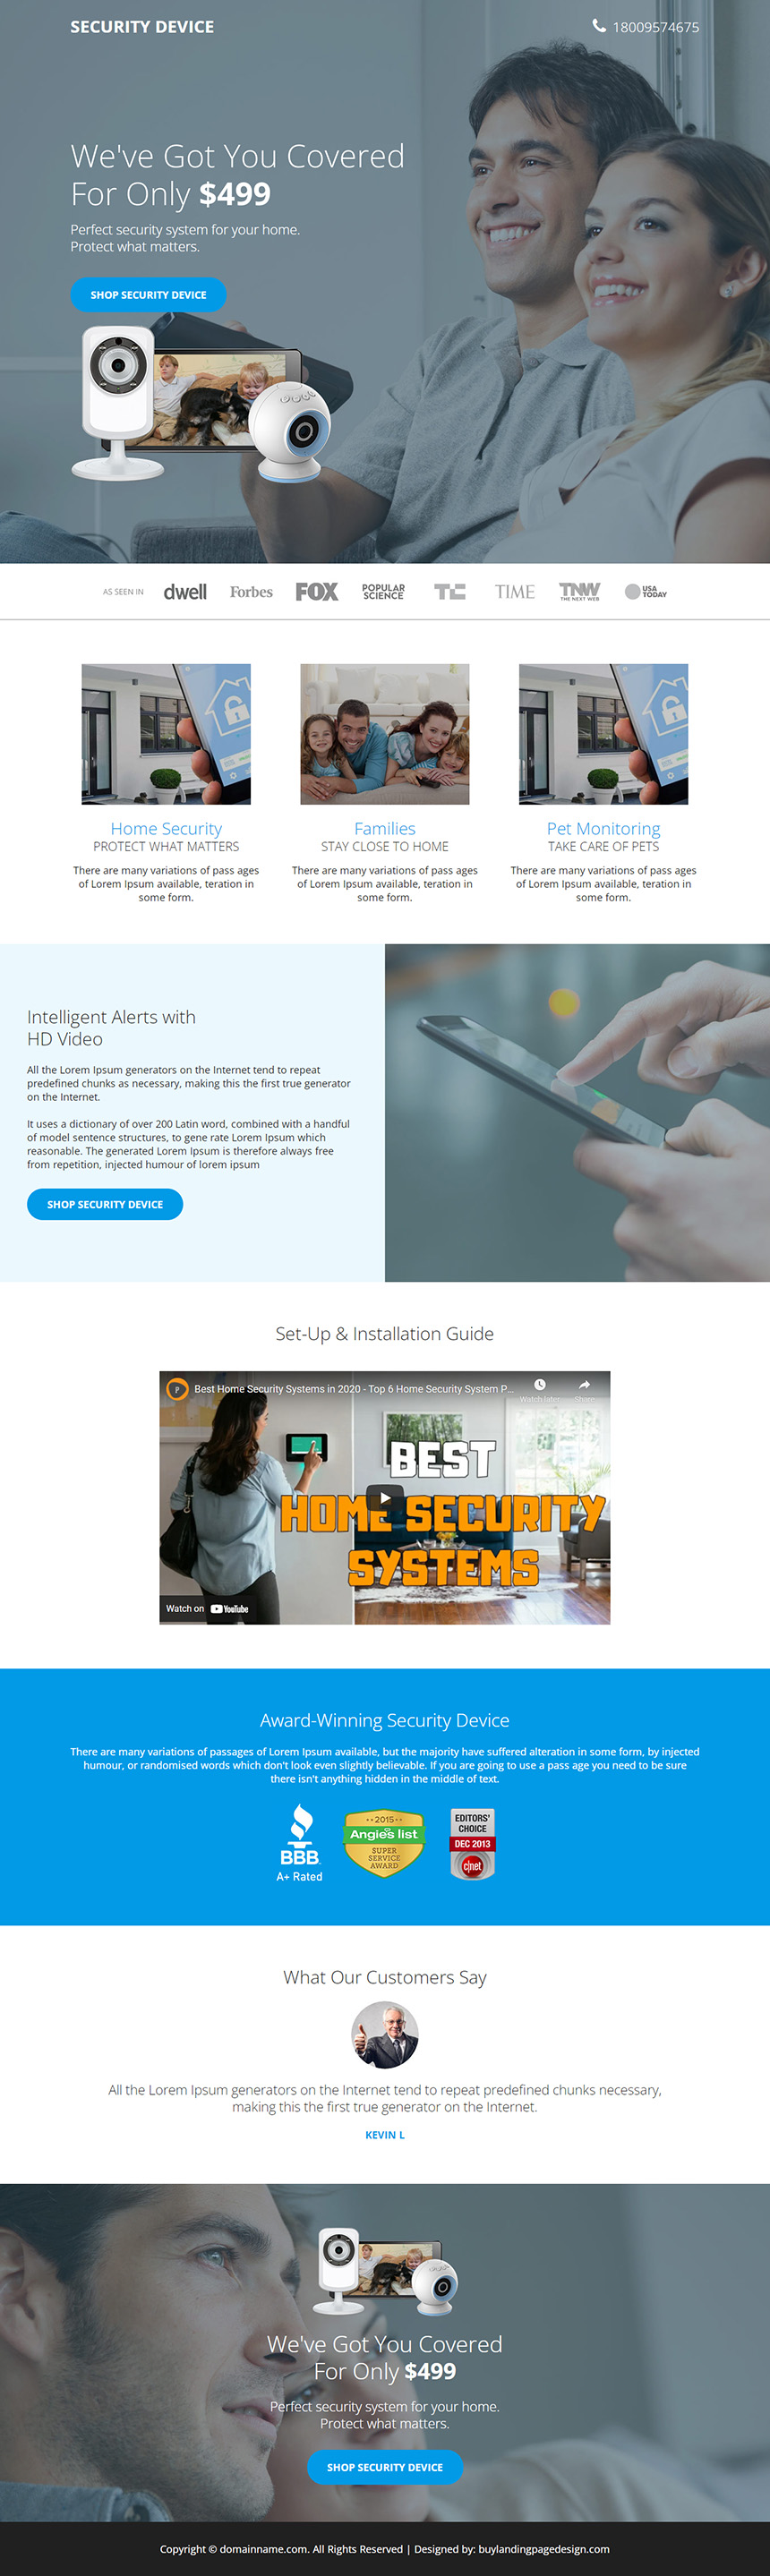 home security device responsive landing page design